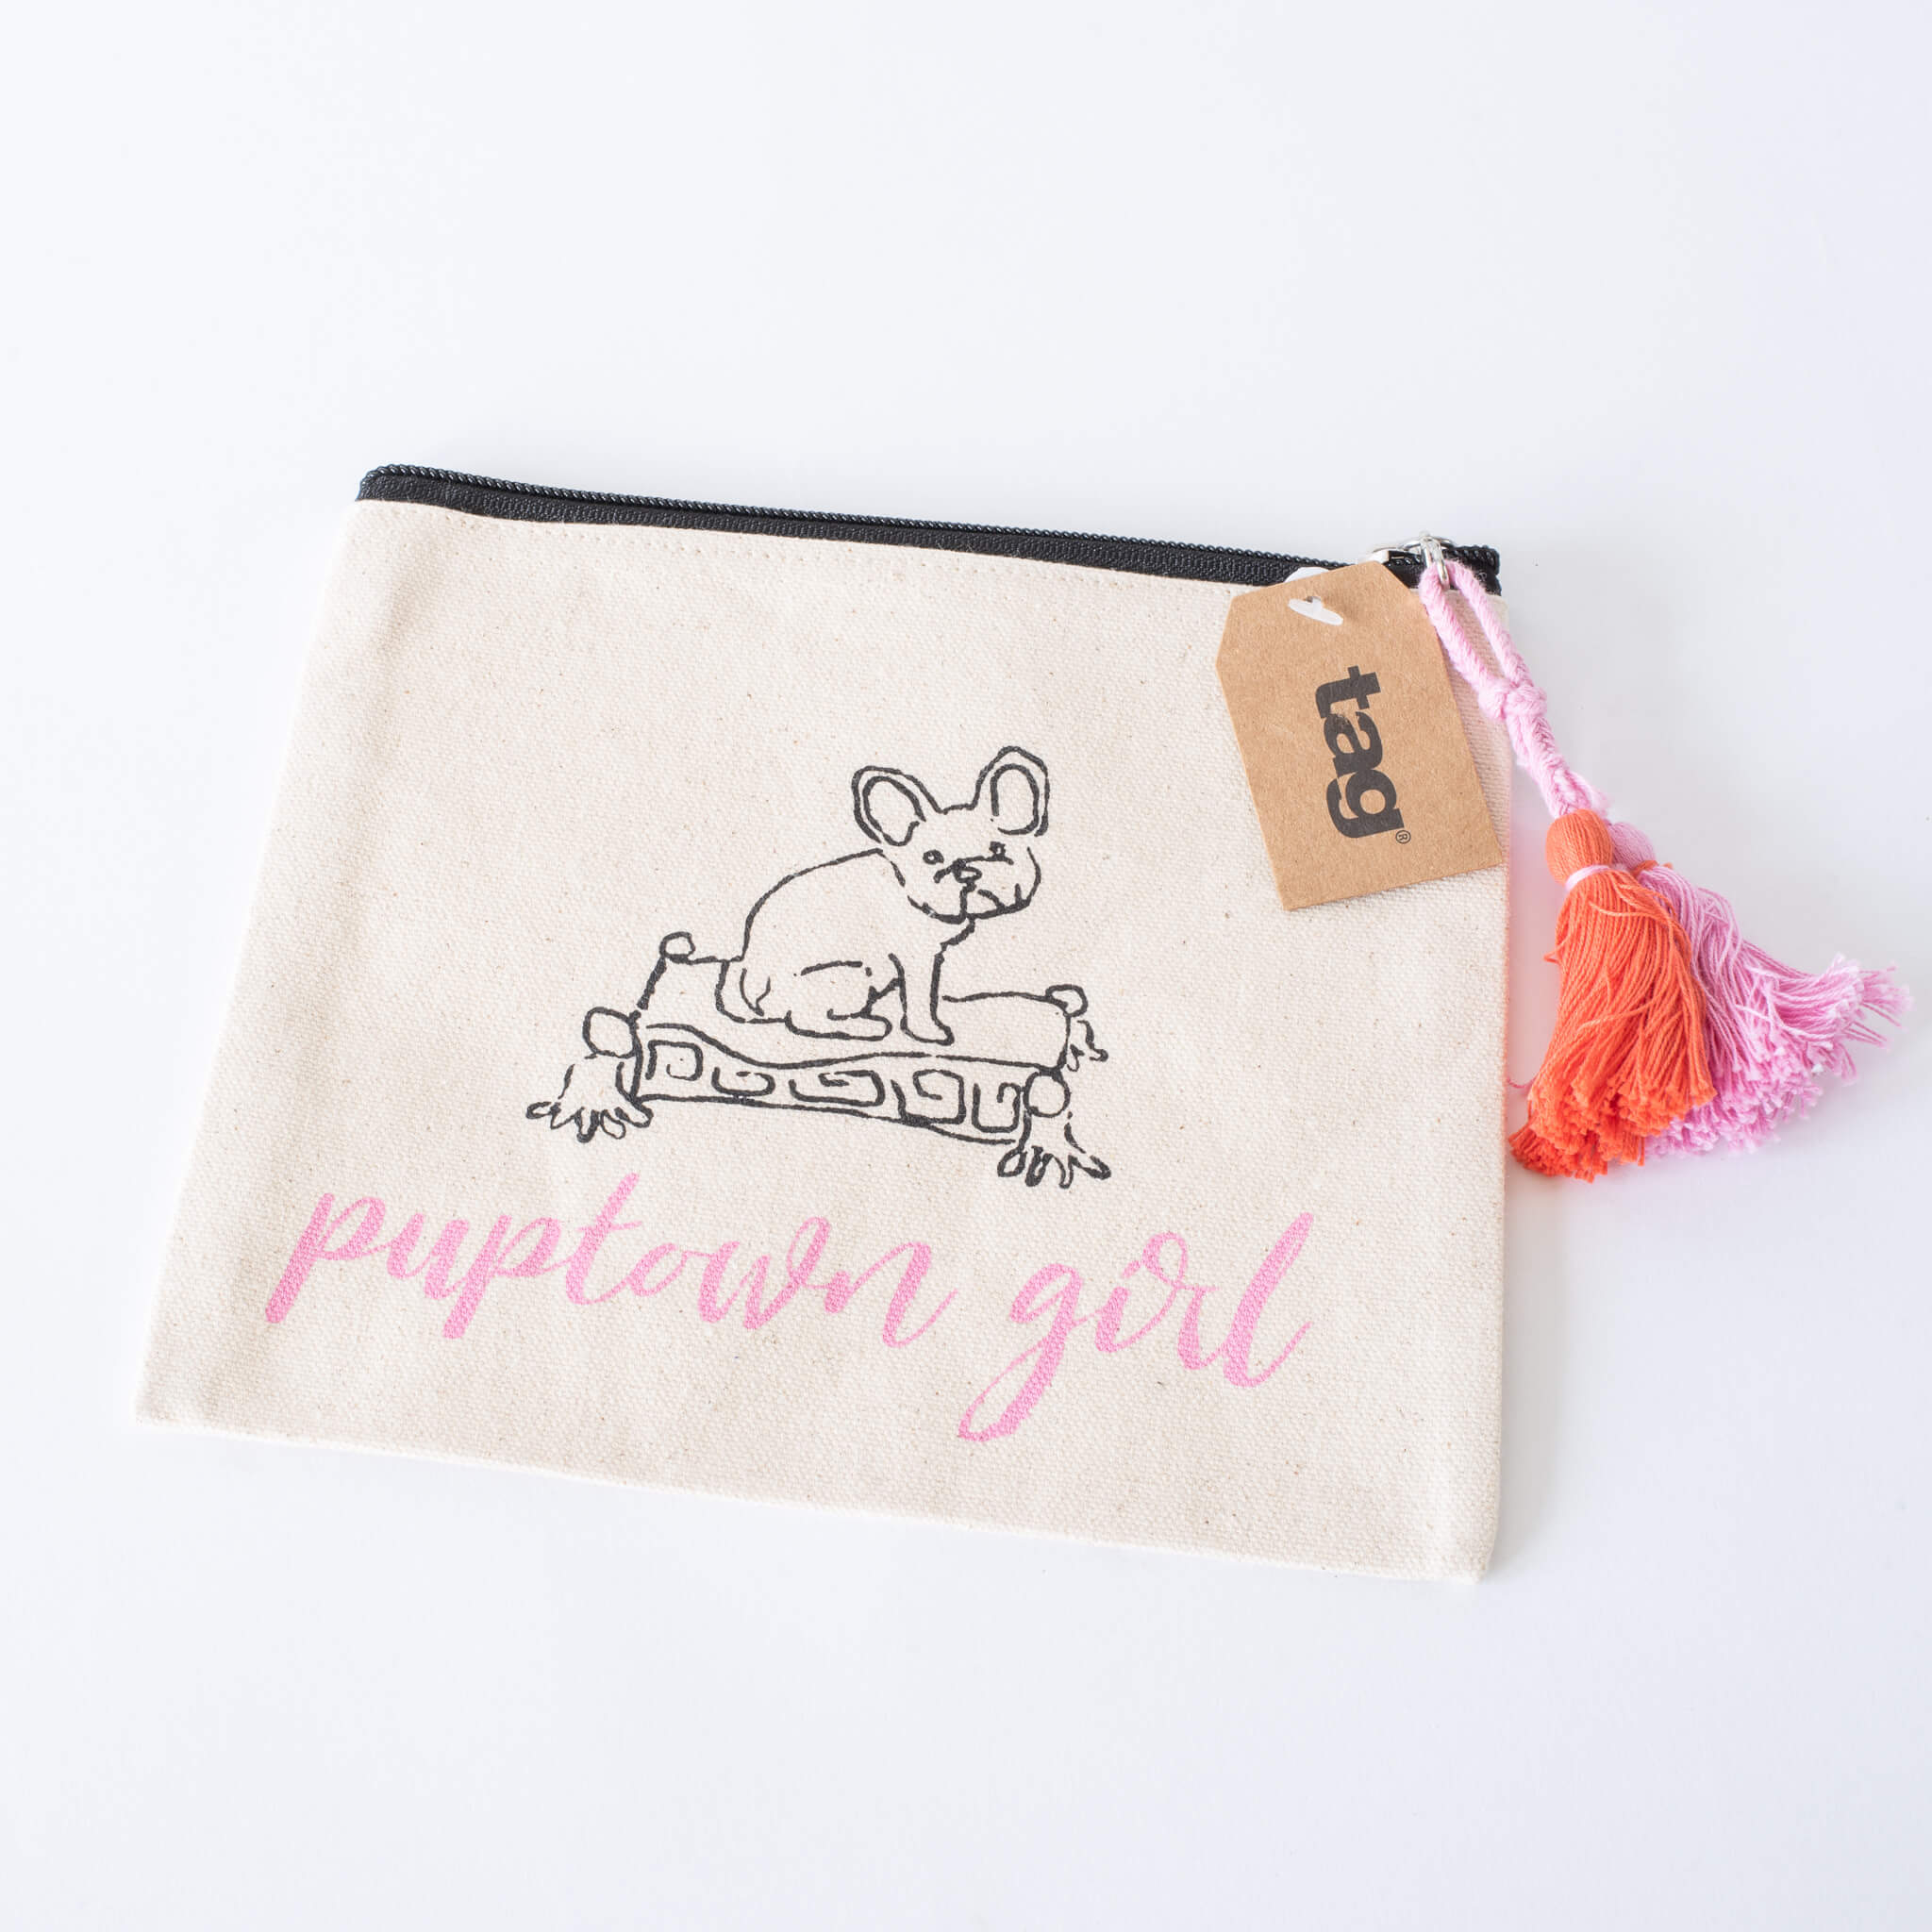 Canvas Pouch | Puptown girl